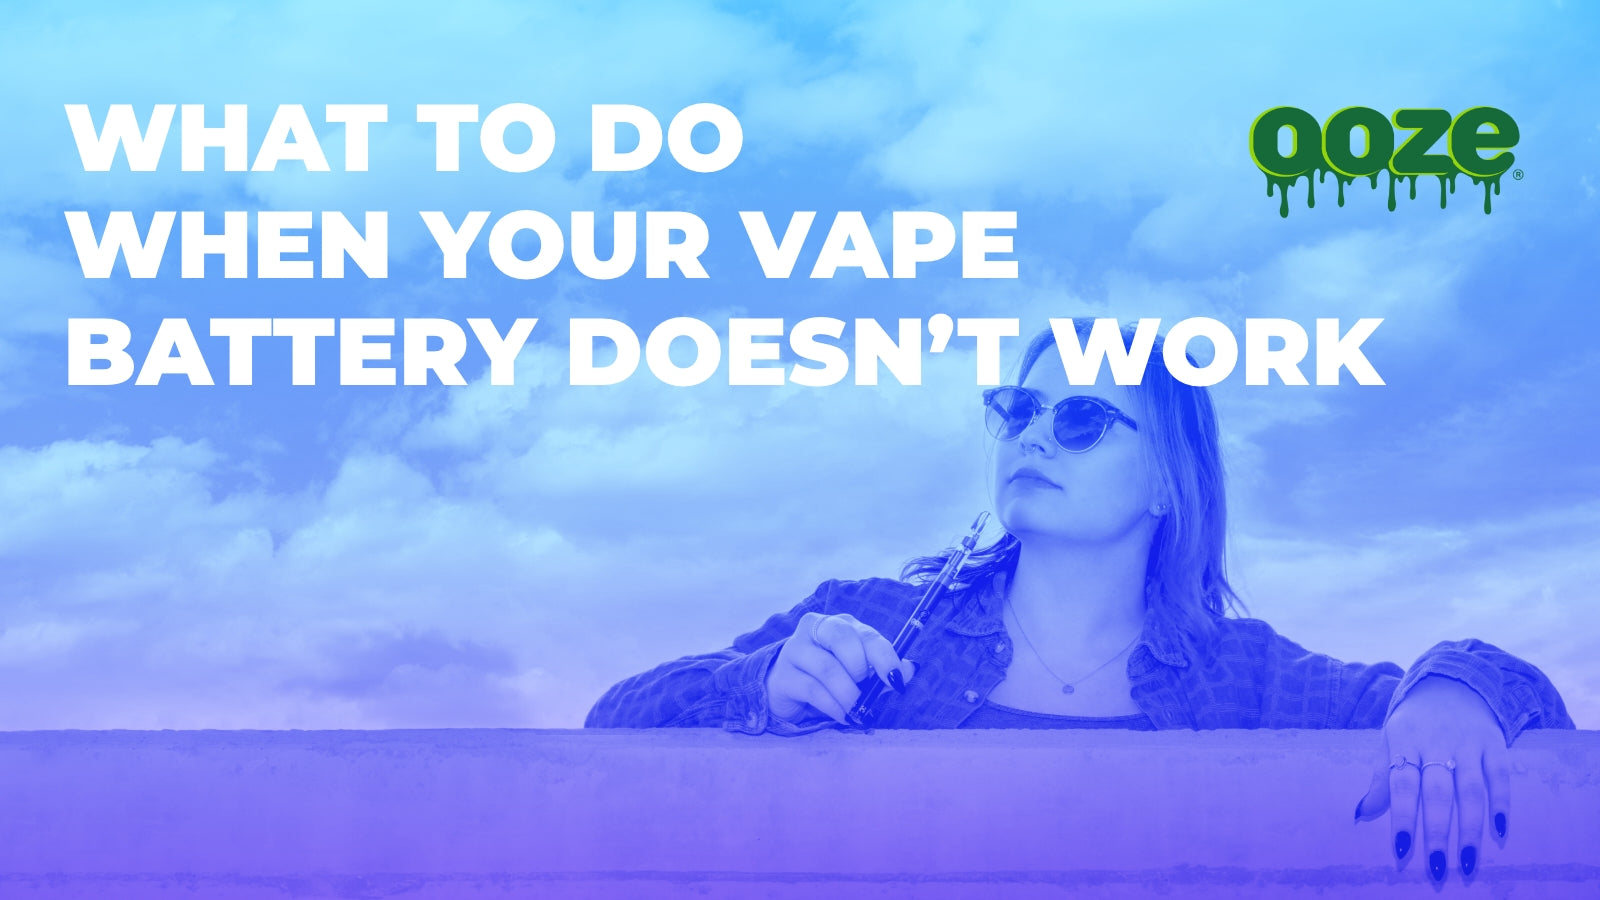 What To Do When Your Vape Battery Doesn’t Work